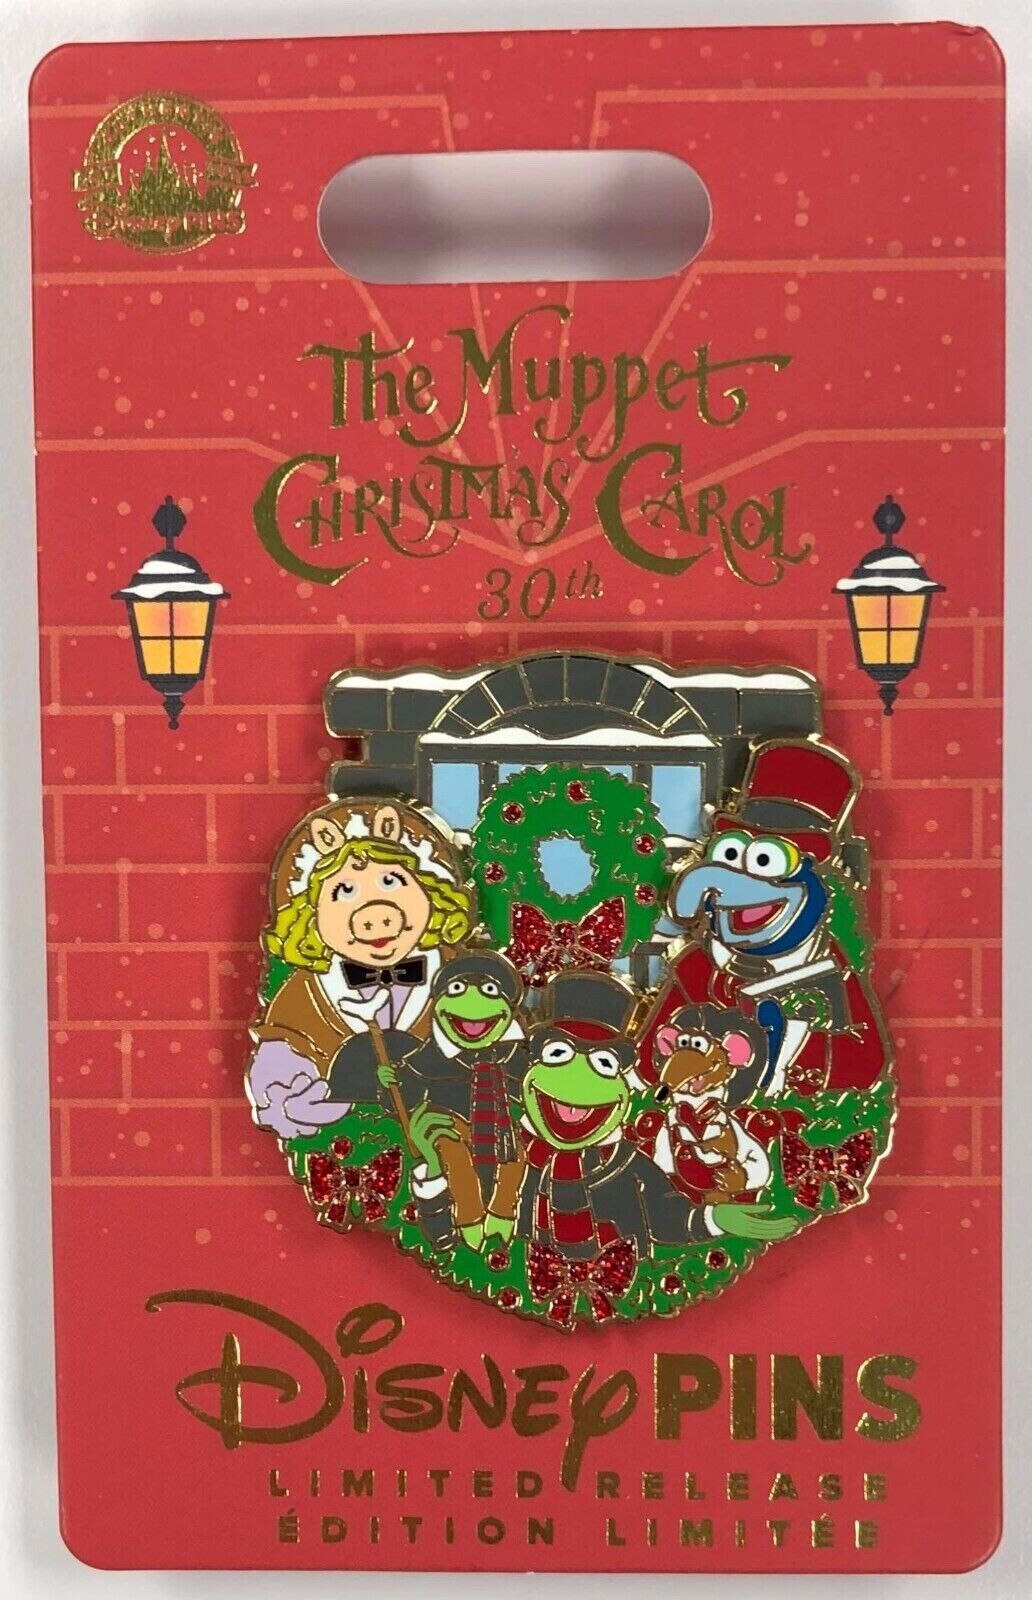 The Muppet Christmas Carol 30th Anniversary Disney LR Pin Brand New in package